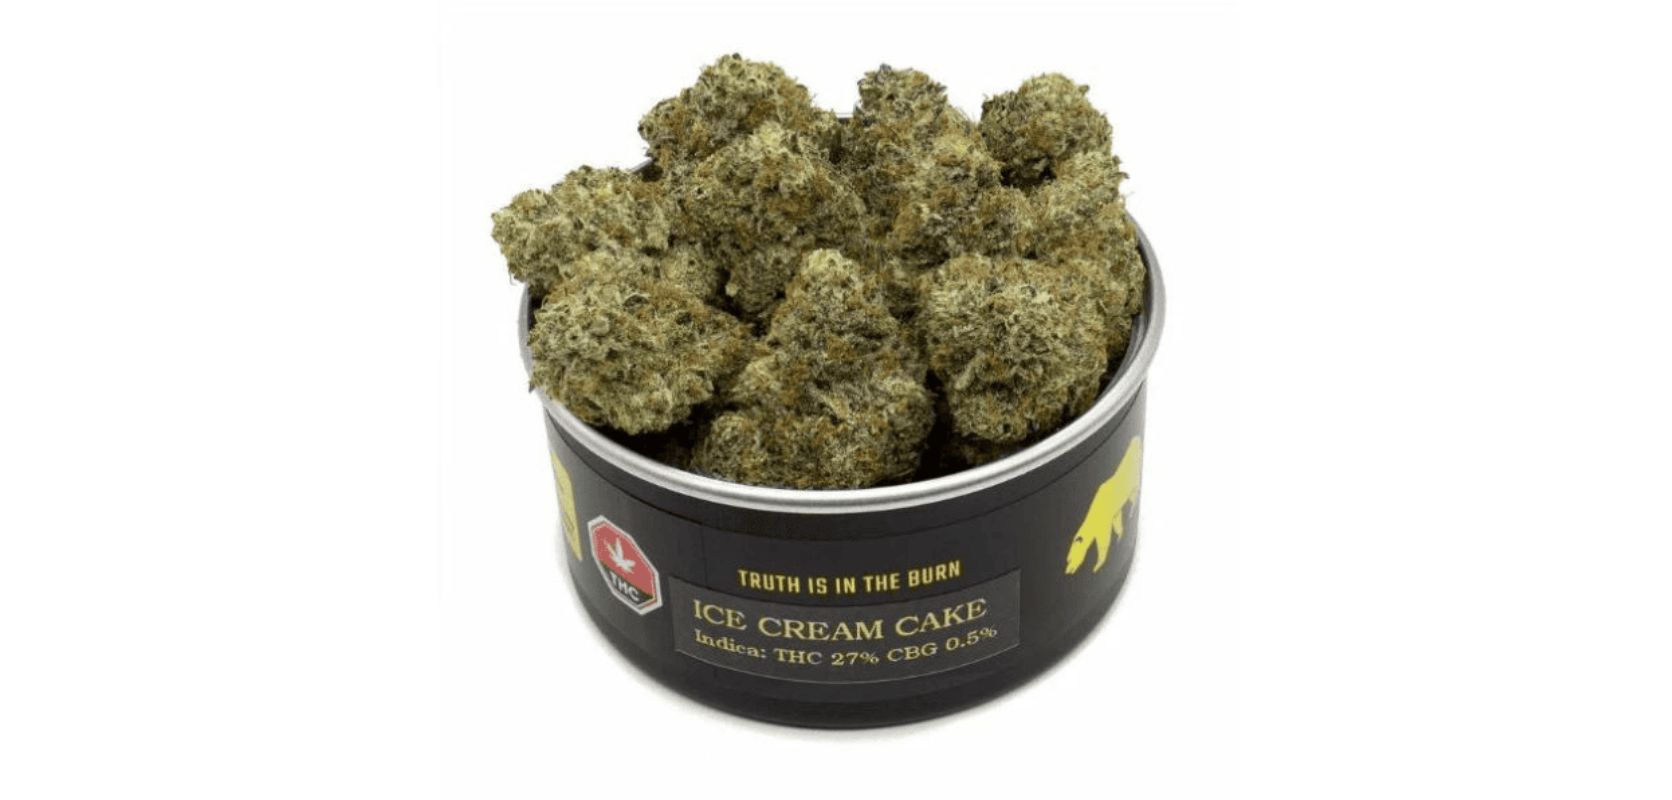 Buy Ice Cream Cake strain from the best cannabis dispensary in Canada to experience a perfect balance of relaxation and euphoria.